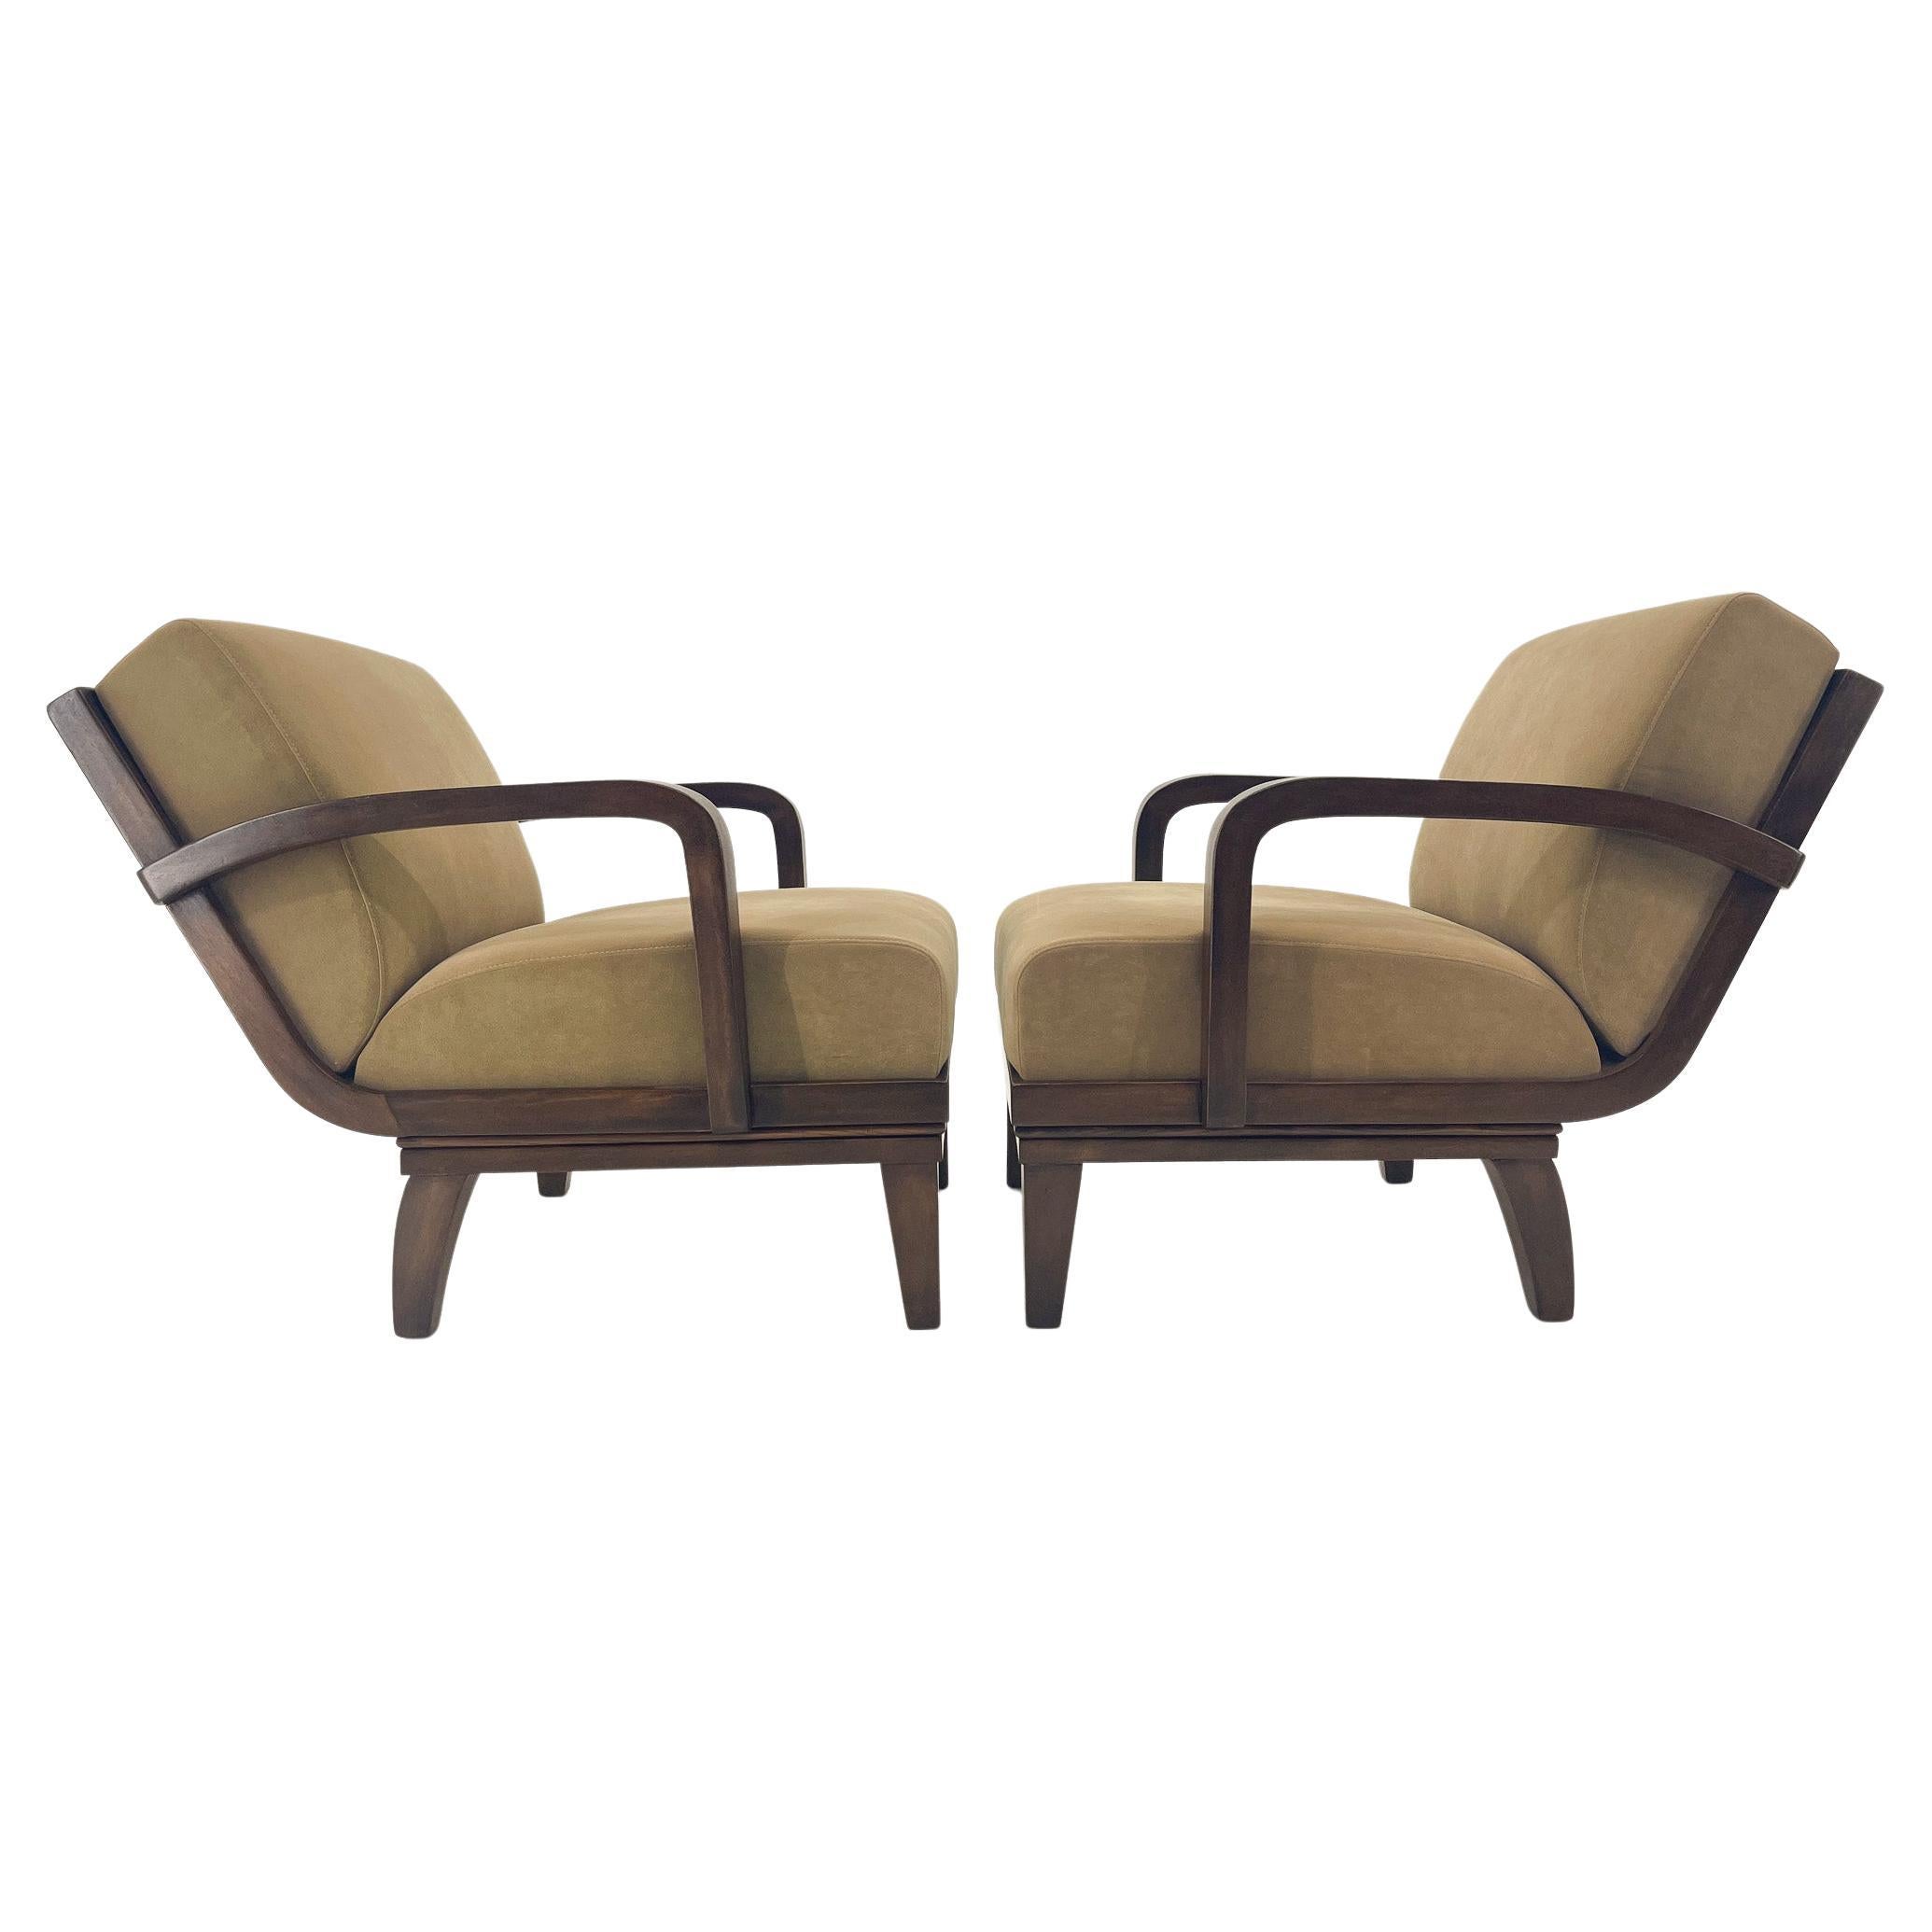 Set of Two Mid-century Club Chairs, 1970's